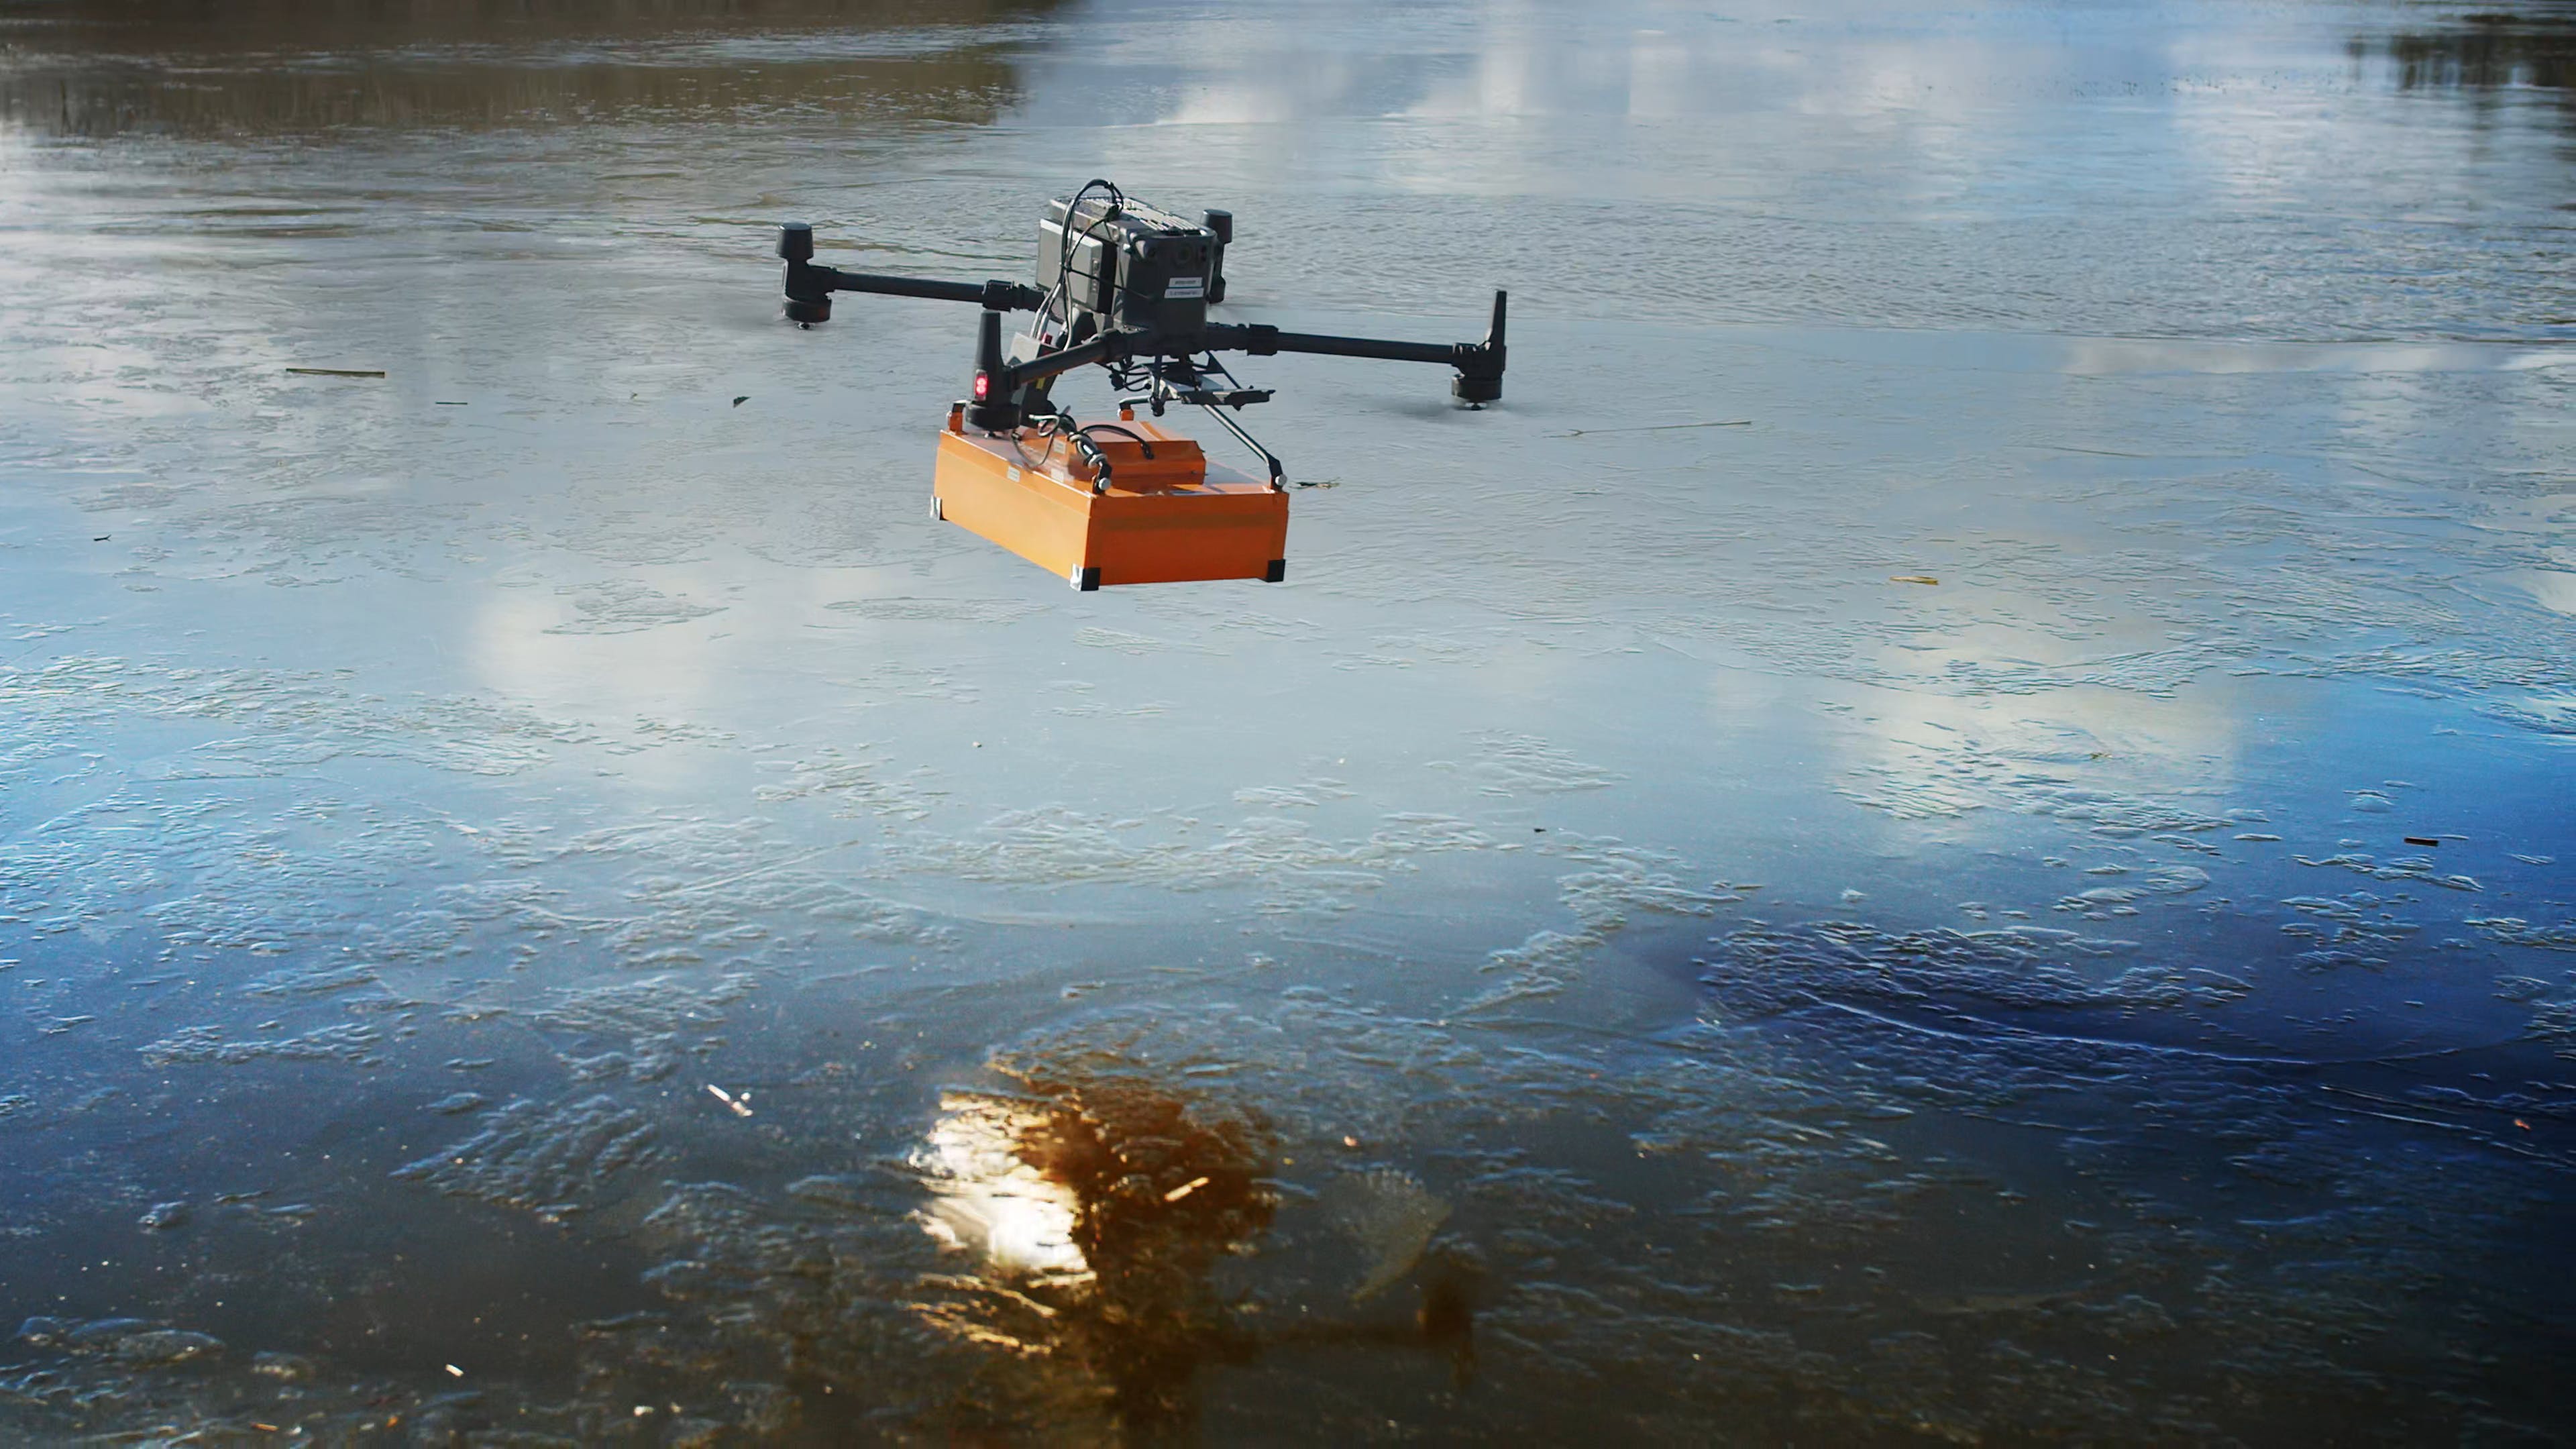 An Altomaxx drone equipped with ground penetrating radar. With this technology the N.L. company worked with First Nations in Western Canada to find the unmarked graves of residential school children. - Contributed